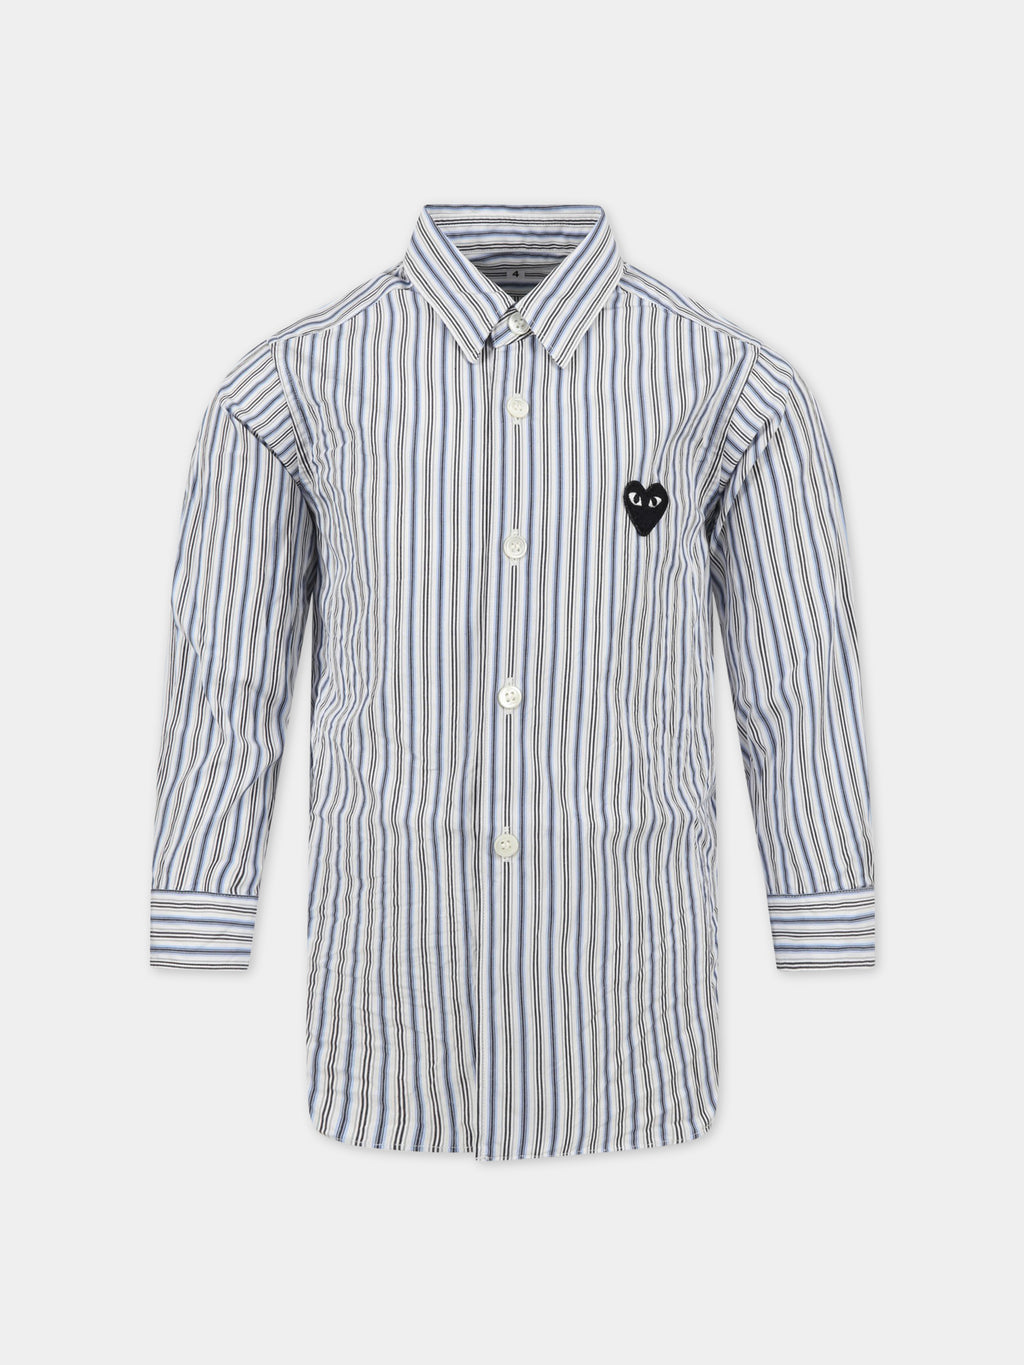 Striped shirt for kids with iconic logo